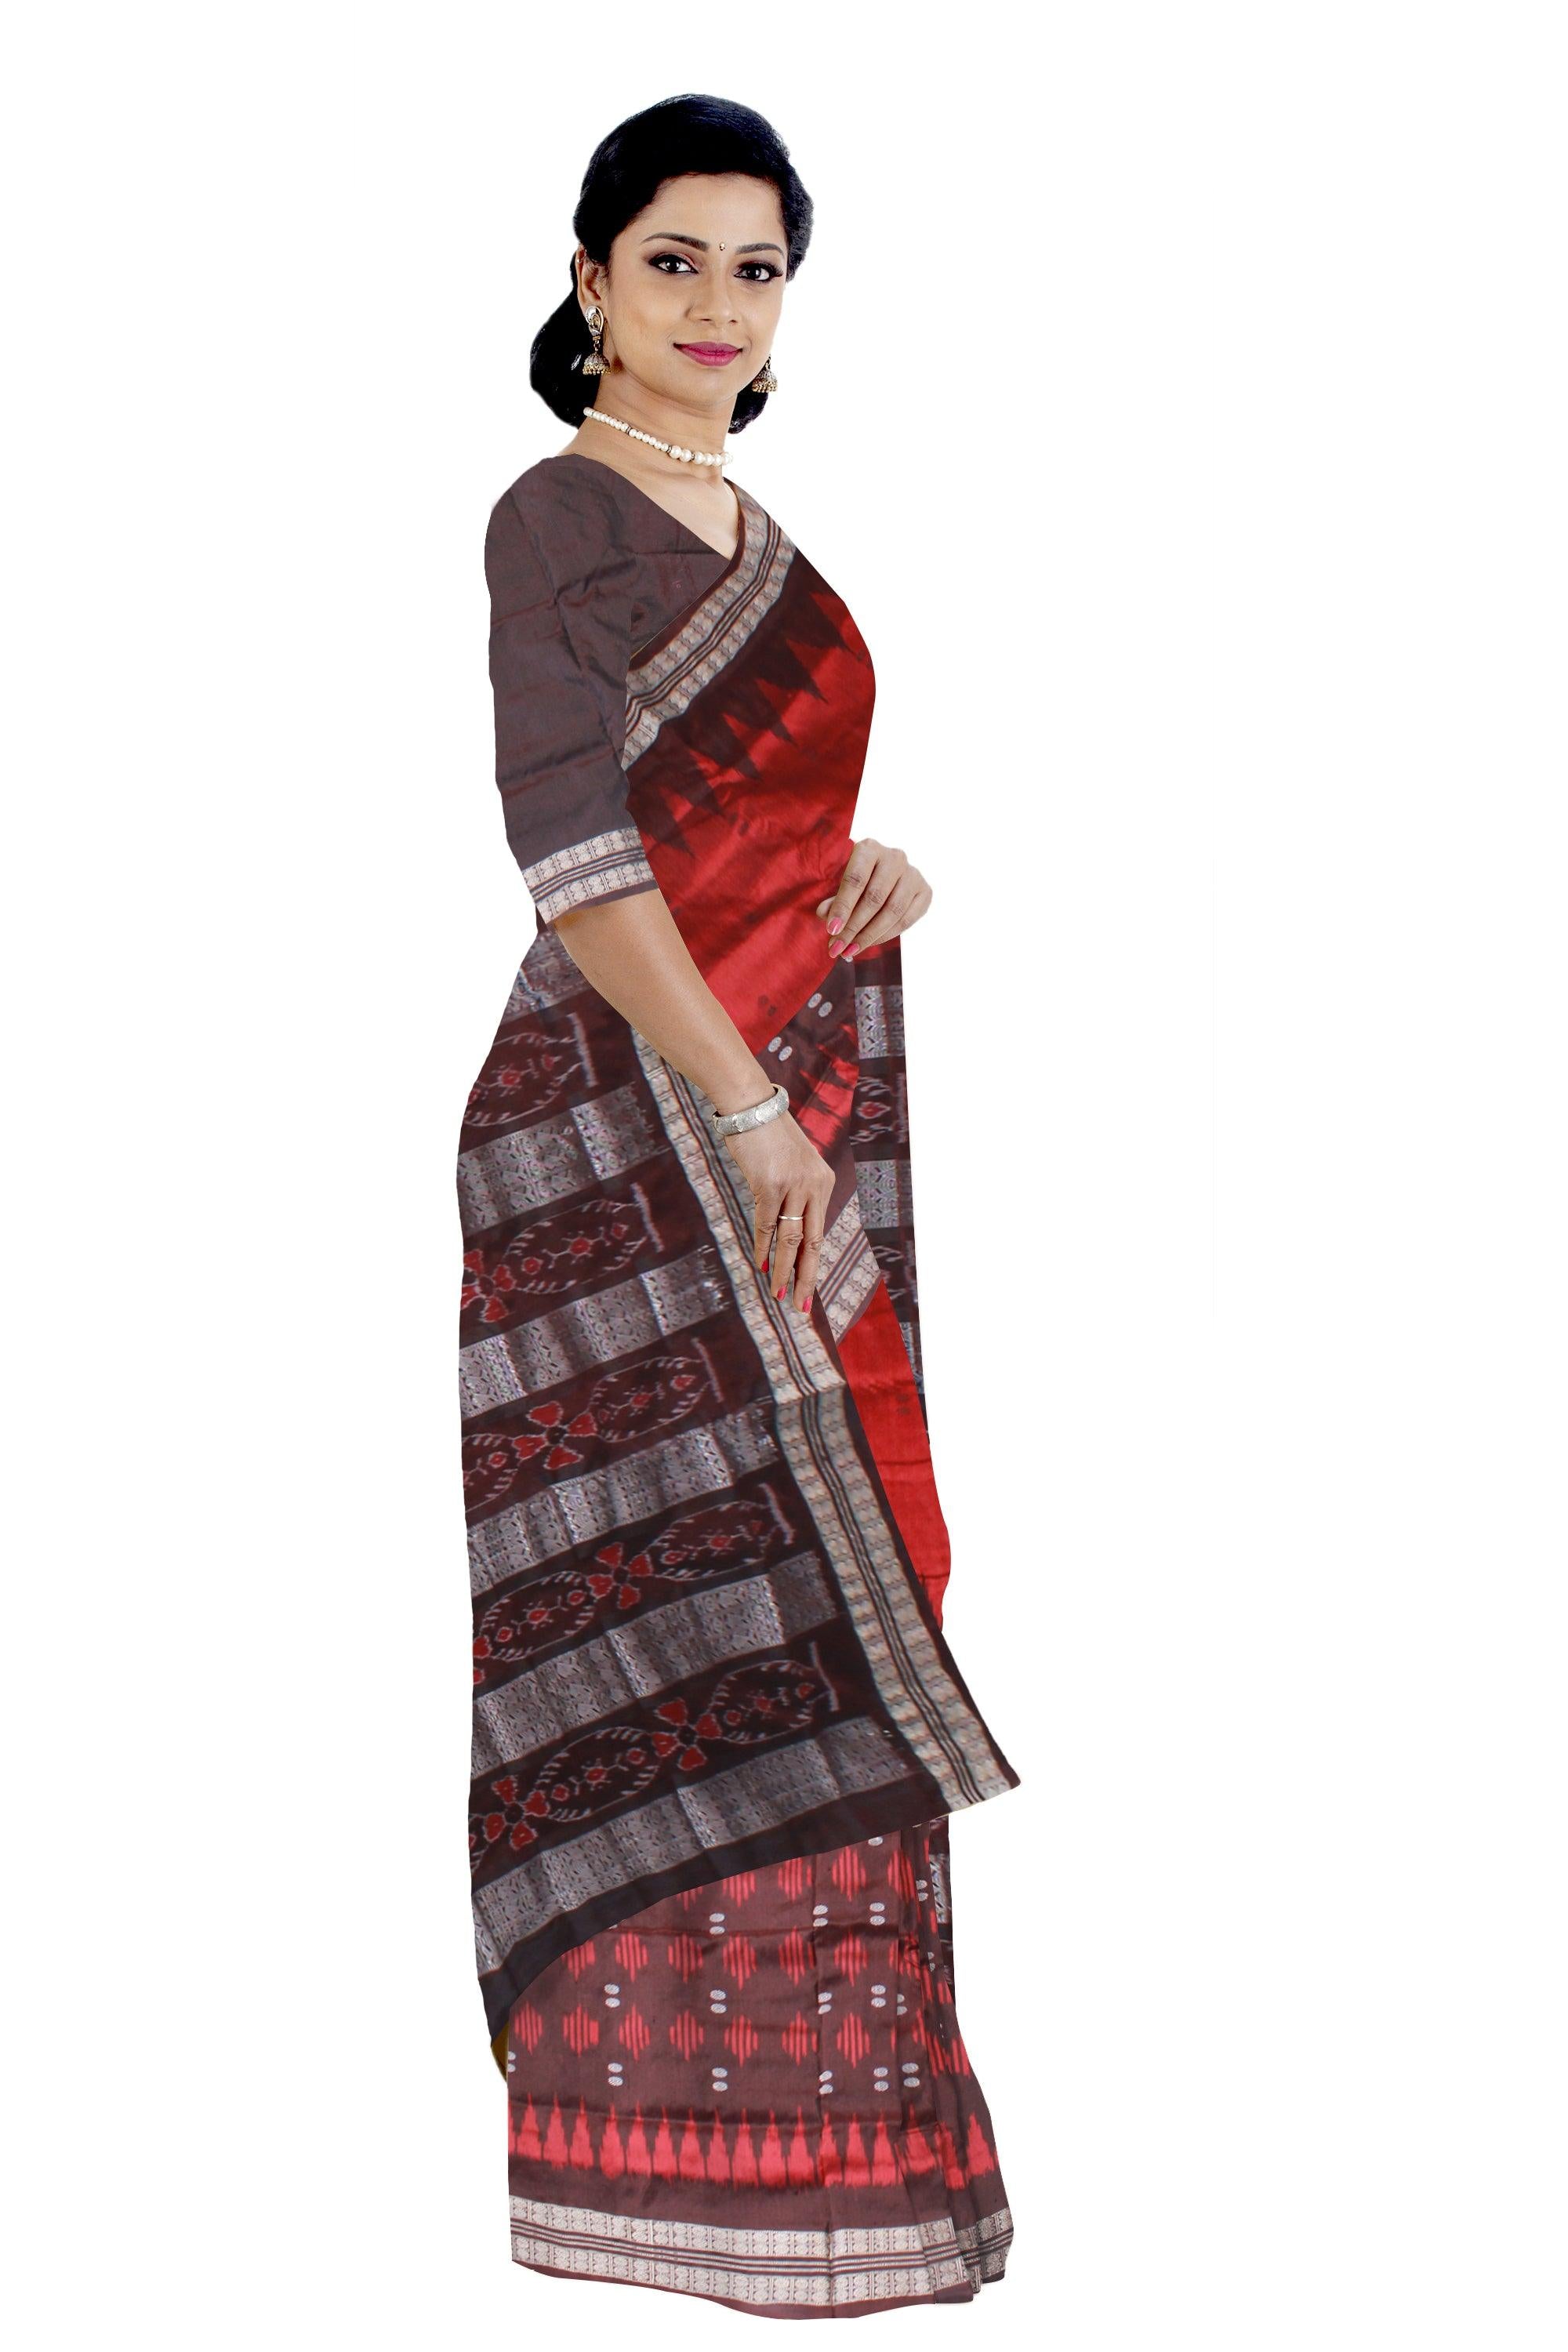 NEW ARRIVAL MAROON AND COFFFEE COLOR IKAT PATTERN PATA SAREE, COMES WITH BLOUSE PIECE. - Koshali Arts & Crafts Enterprise